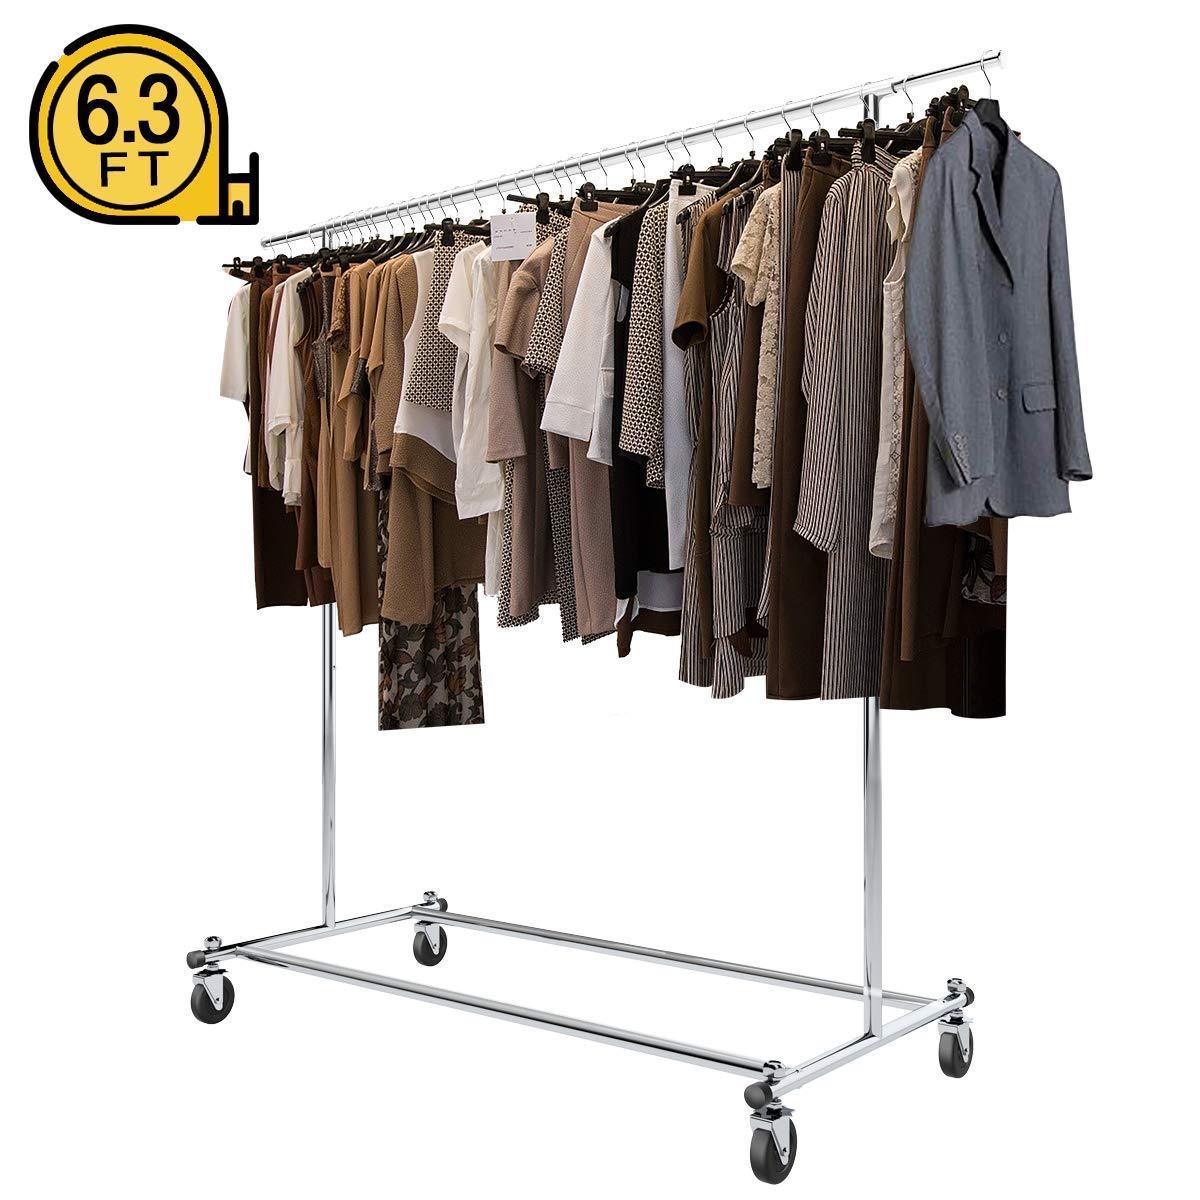 Buy bigroof clothing rack 6 3ft heavy duty clothes rack free standing garment rack on wheels commercial portable closet jacket coat rack rolling drying racks for hanging drying clothes